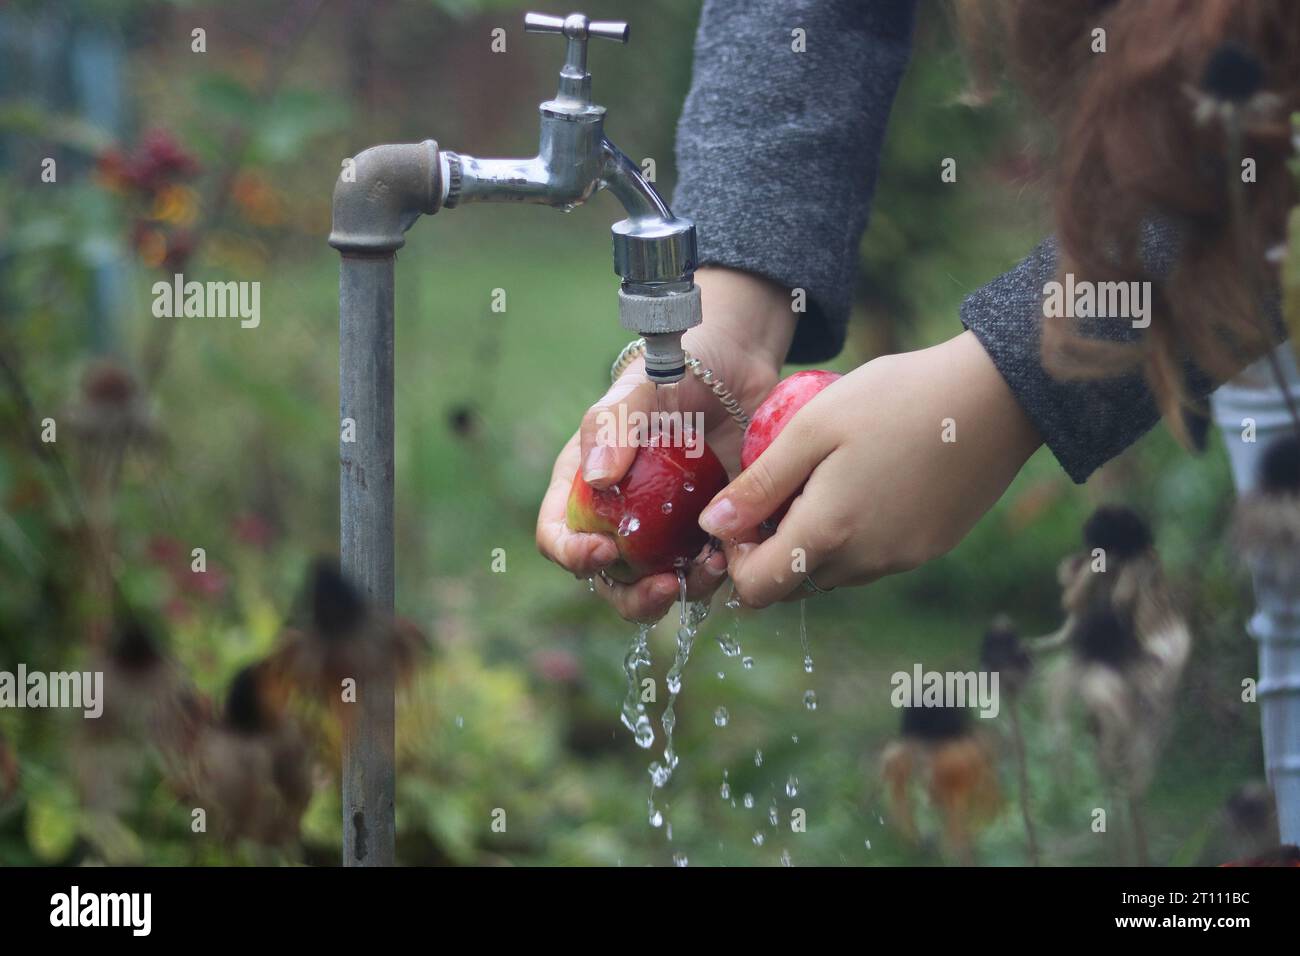 Hands of young woman washing two red apples under the water jet flowing from the tap in garden.Gardening. Garden flowers and plants on the background. Stock Photo